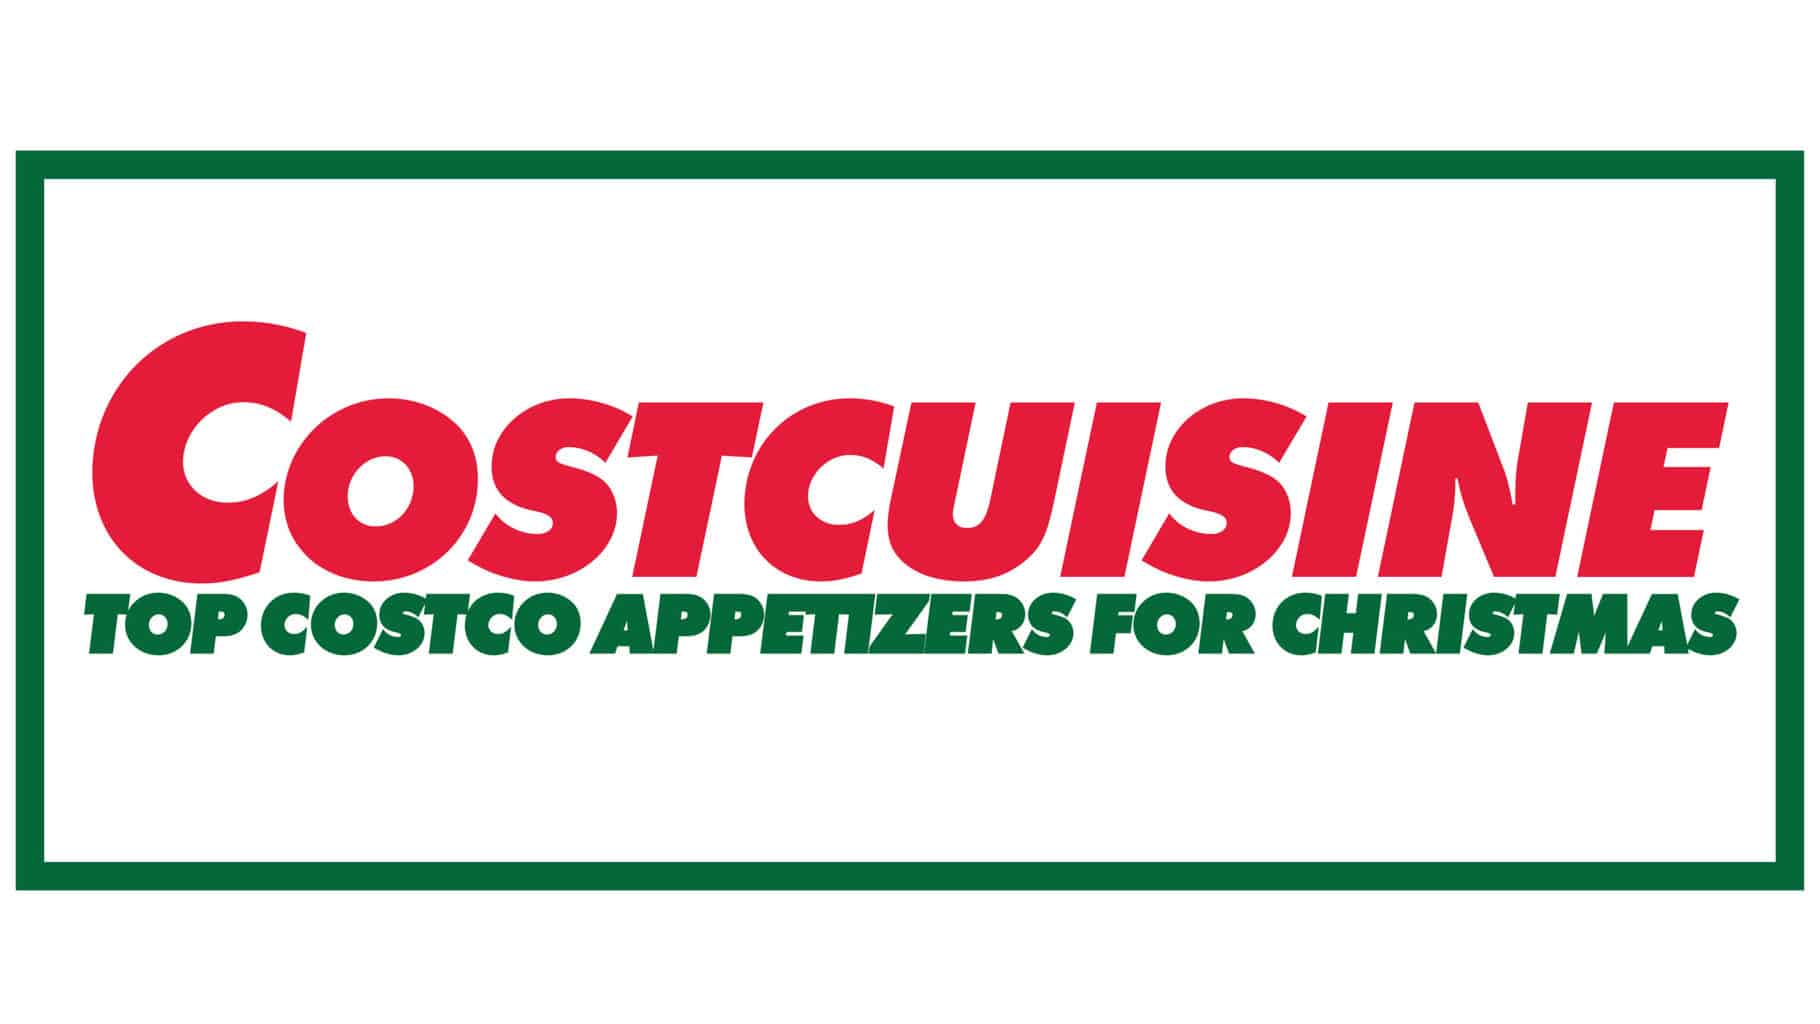 Title graphic - Top Costco Appetizers for Christmas.